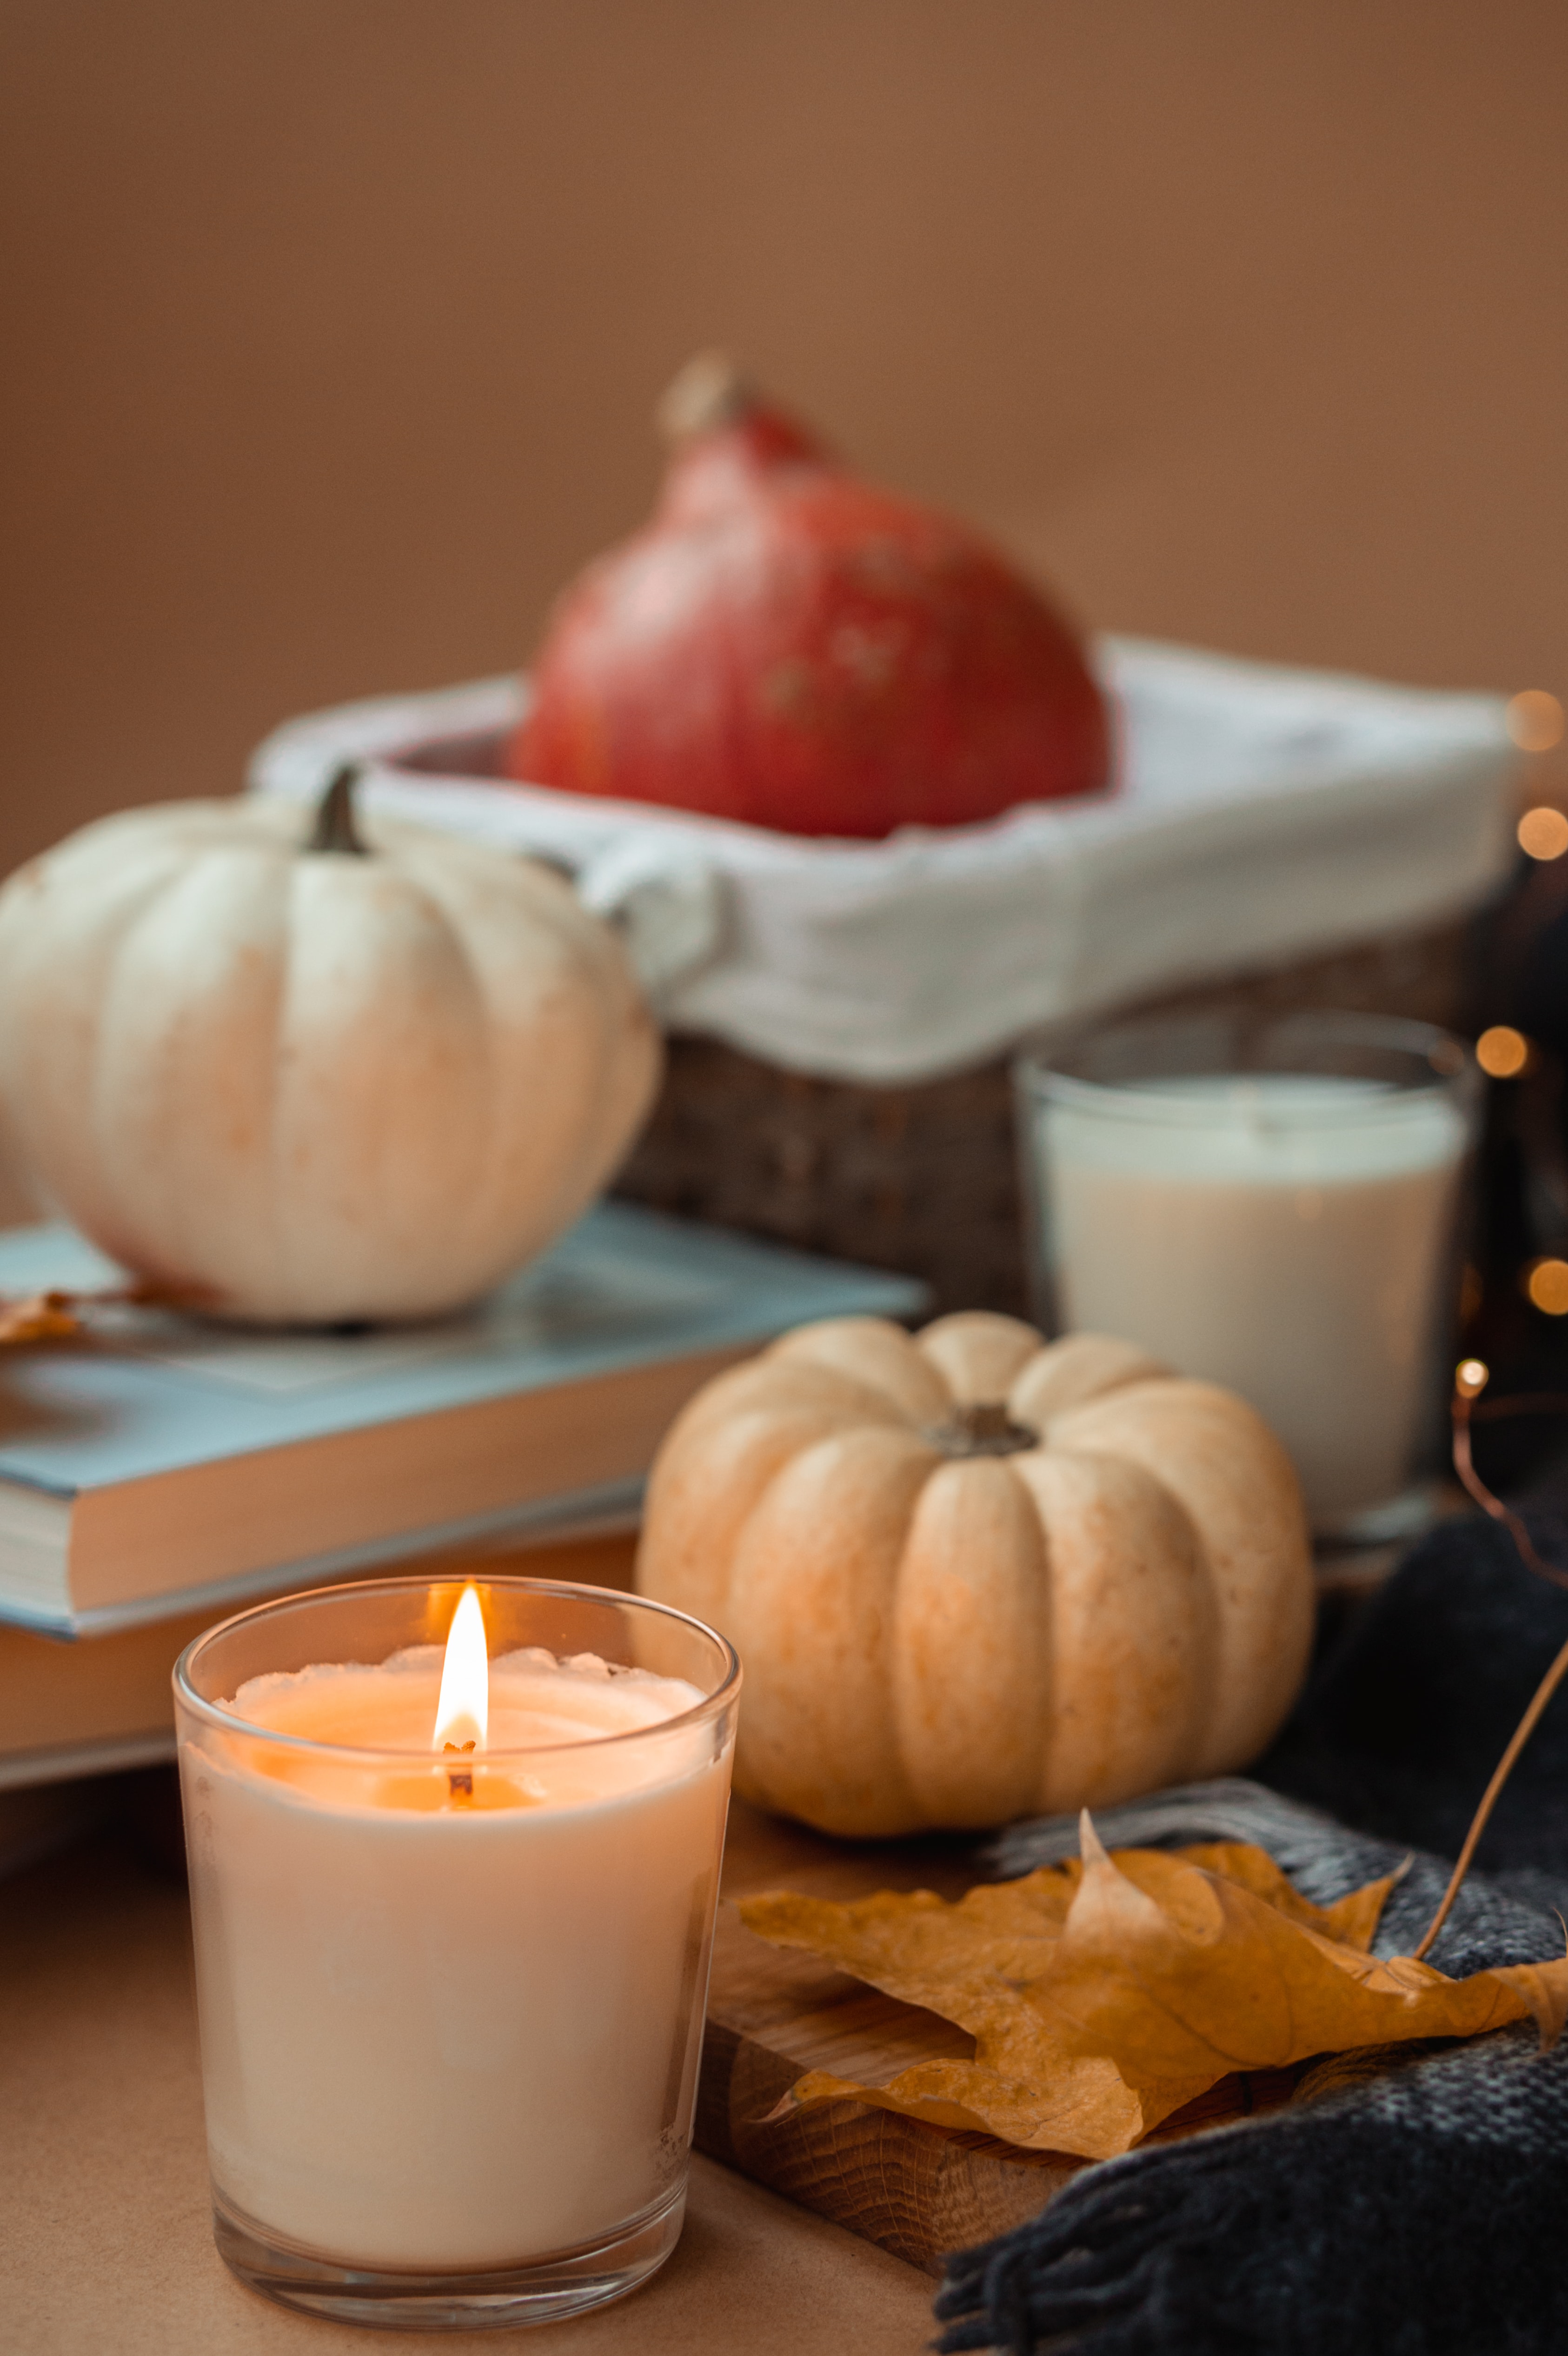 92694 download wallpaper pumpkin, books, miscellanea, miscellaneous, leaflet, candle screensavers and pictures for free